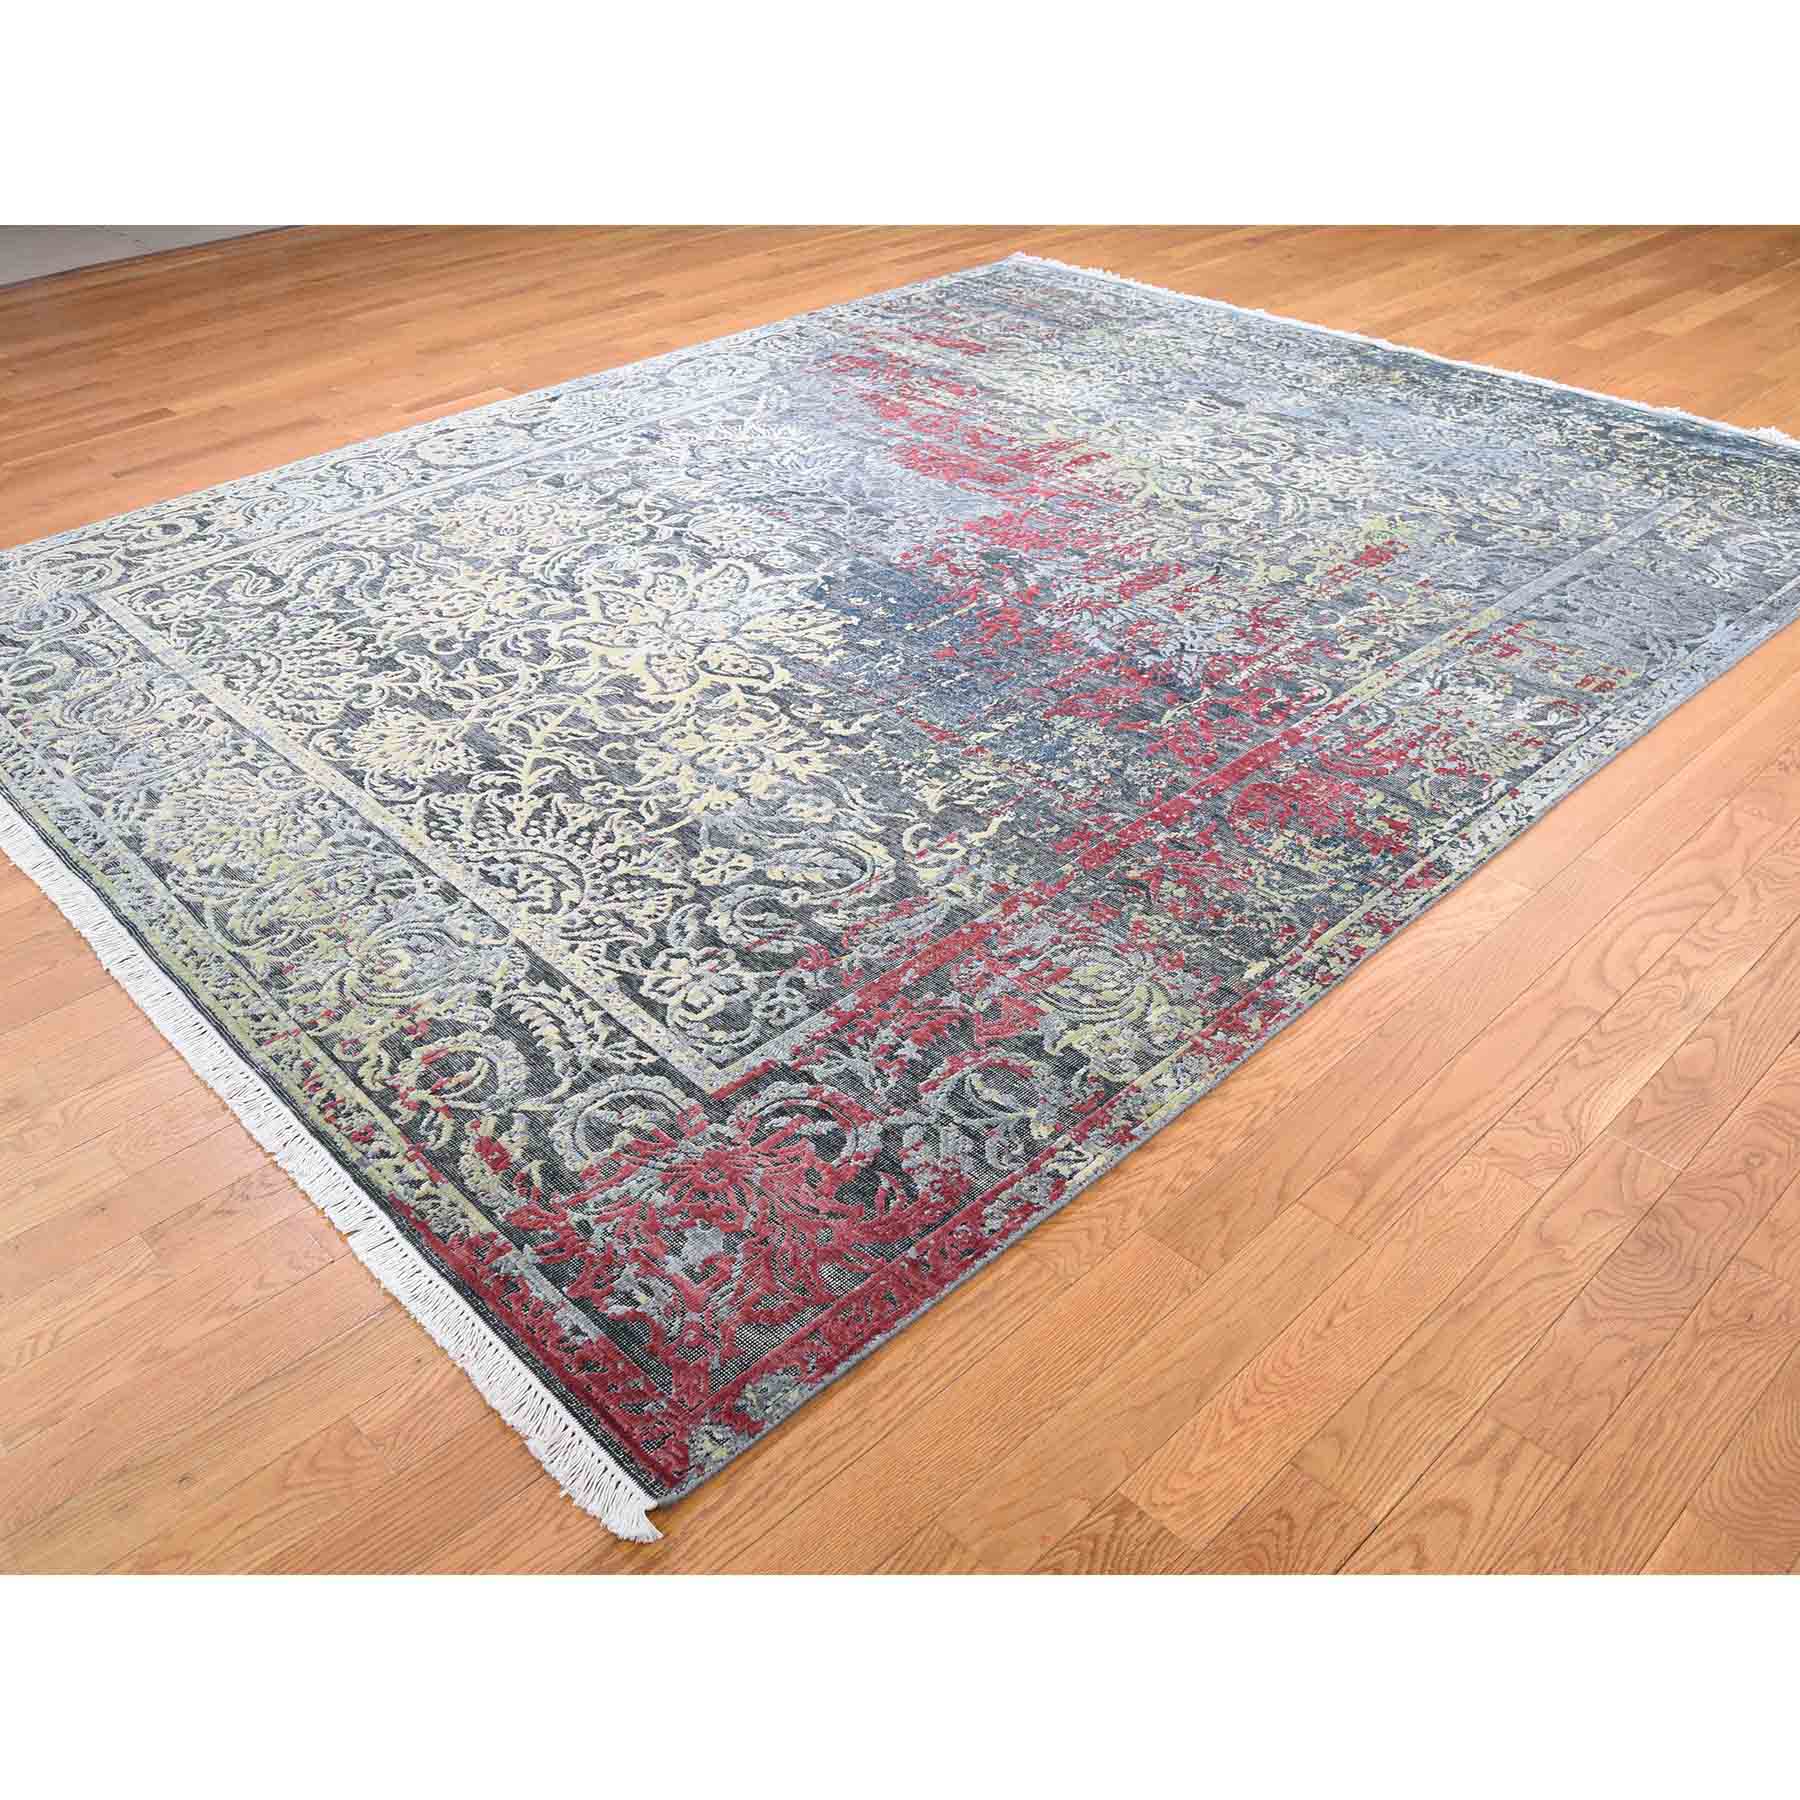 8-1 x10- Hand-Knotted Broken Design Silk with Textured Wool Transitional Rug 